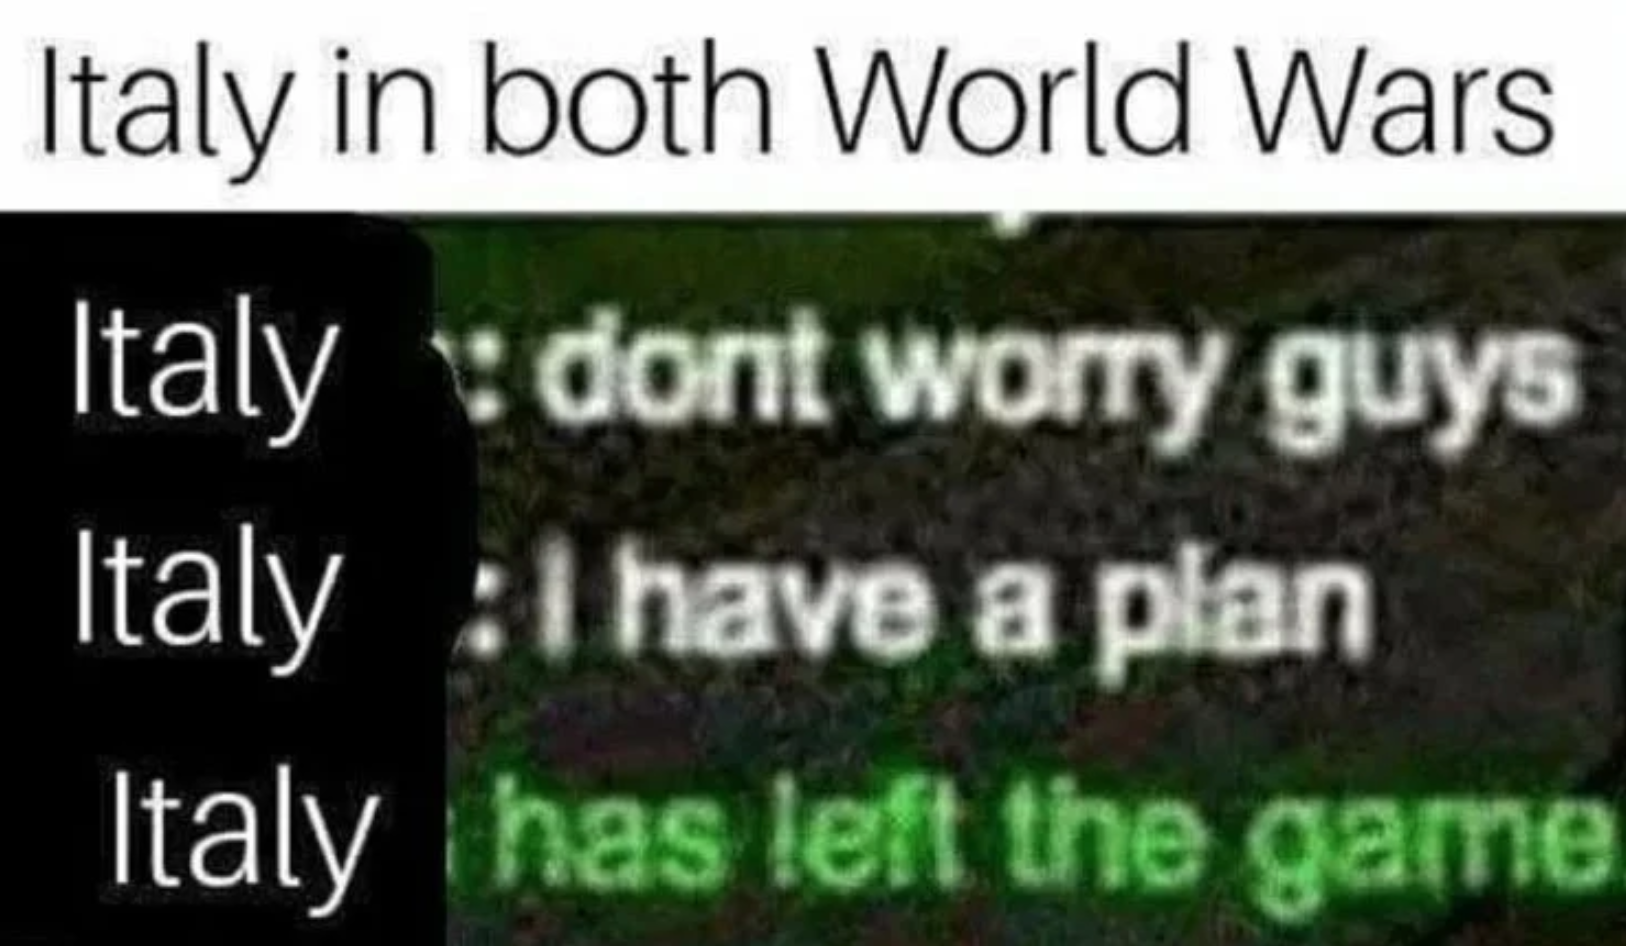 funny gaming memes  - banner - Italy in both World Wars Italy dont worry guys Italy I have a plan Italy has left the game